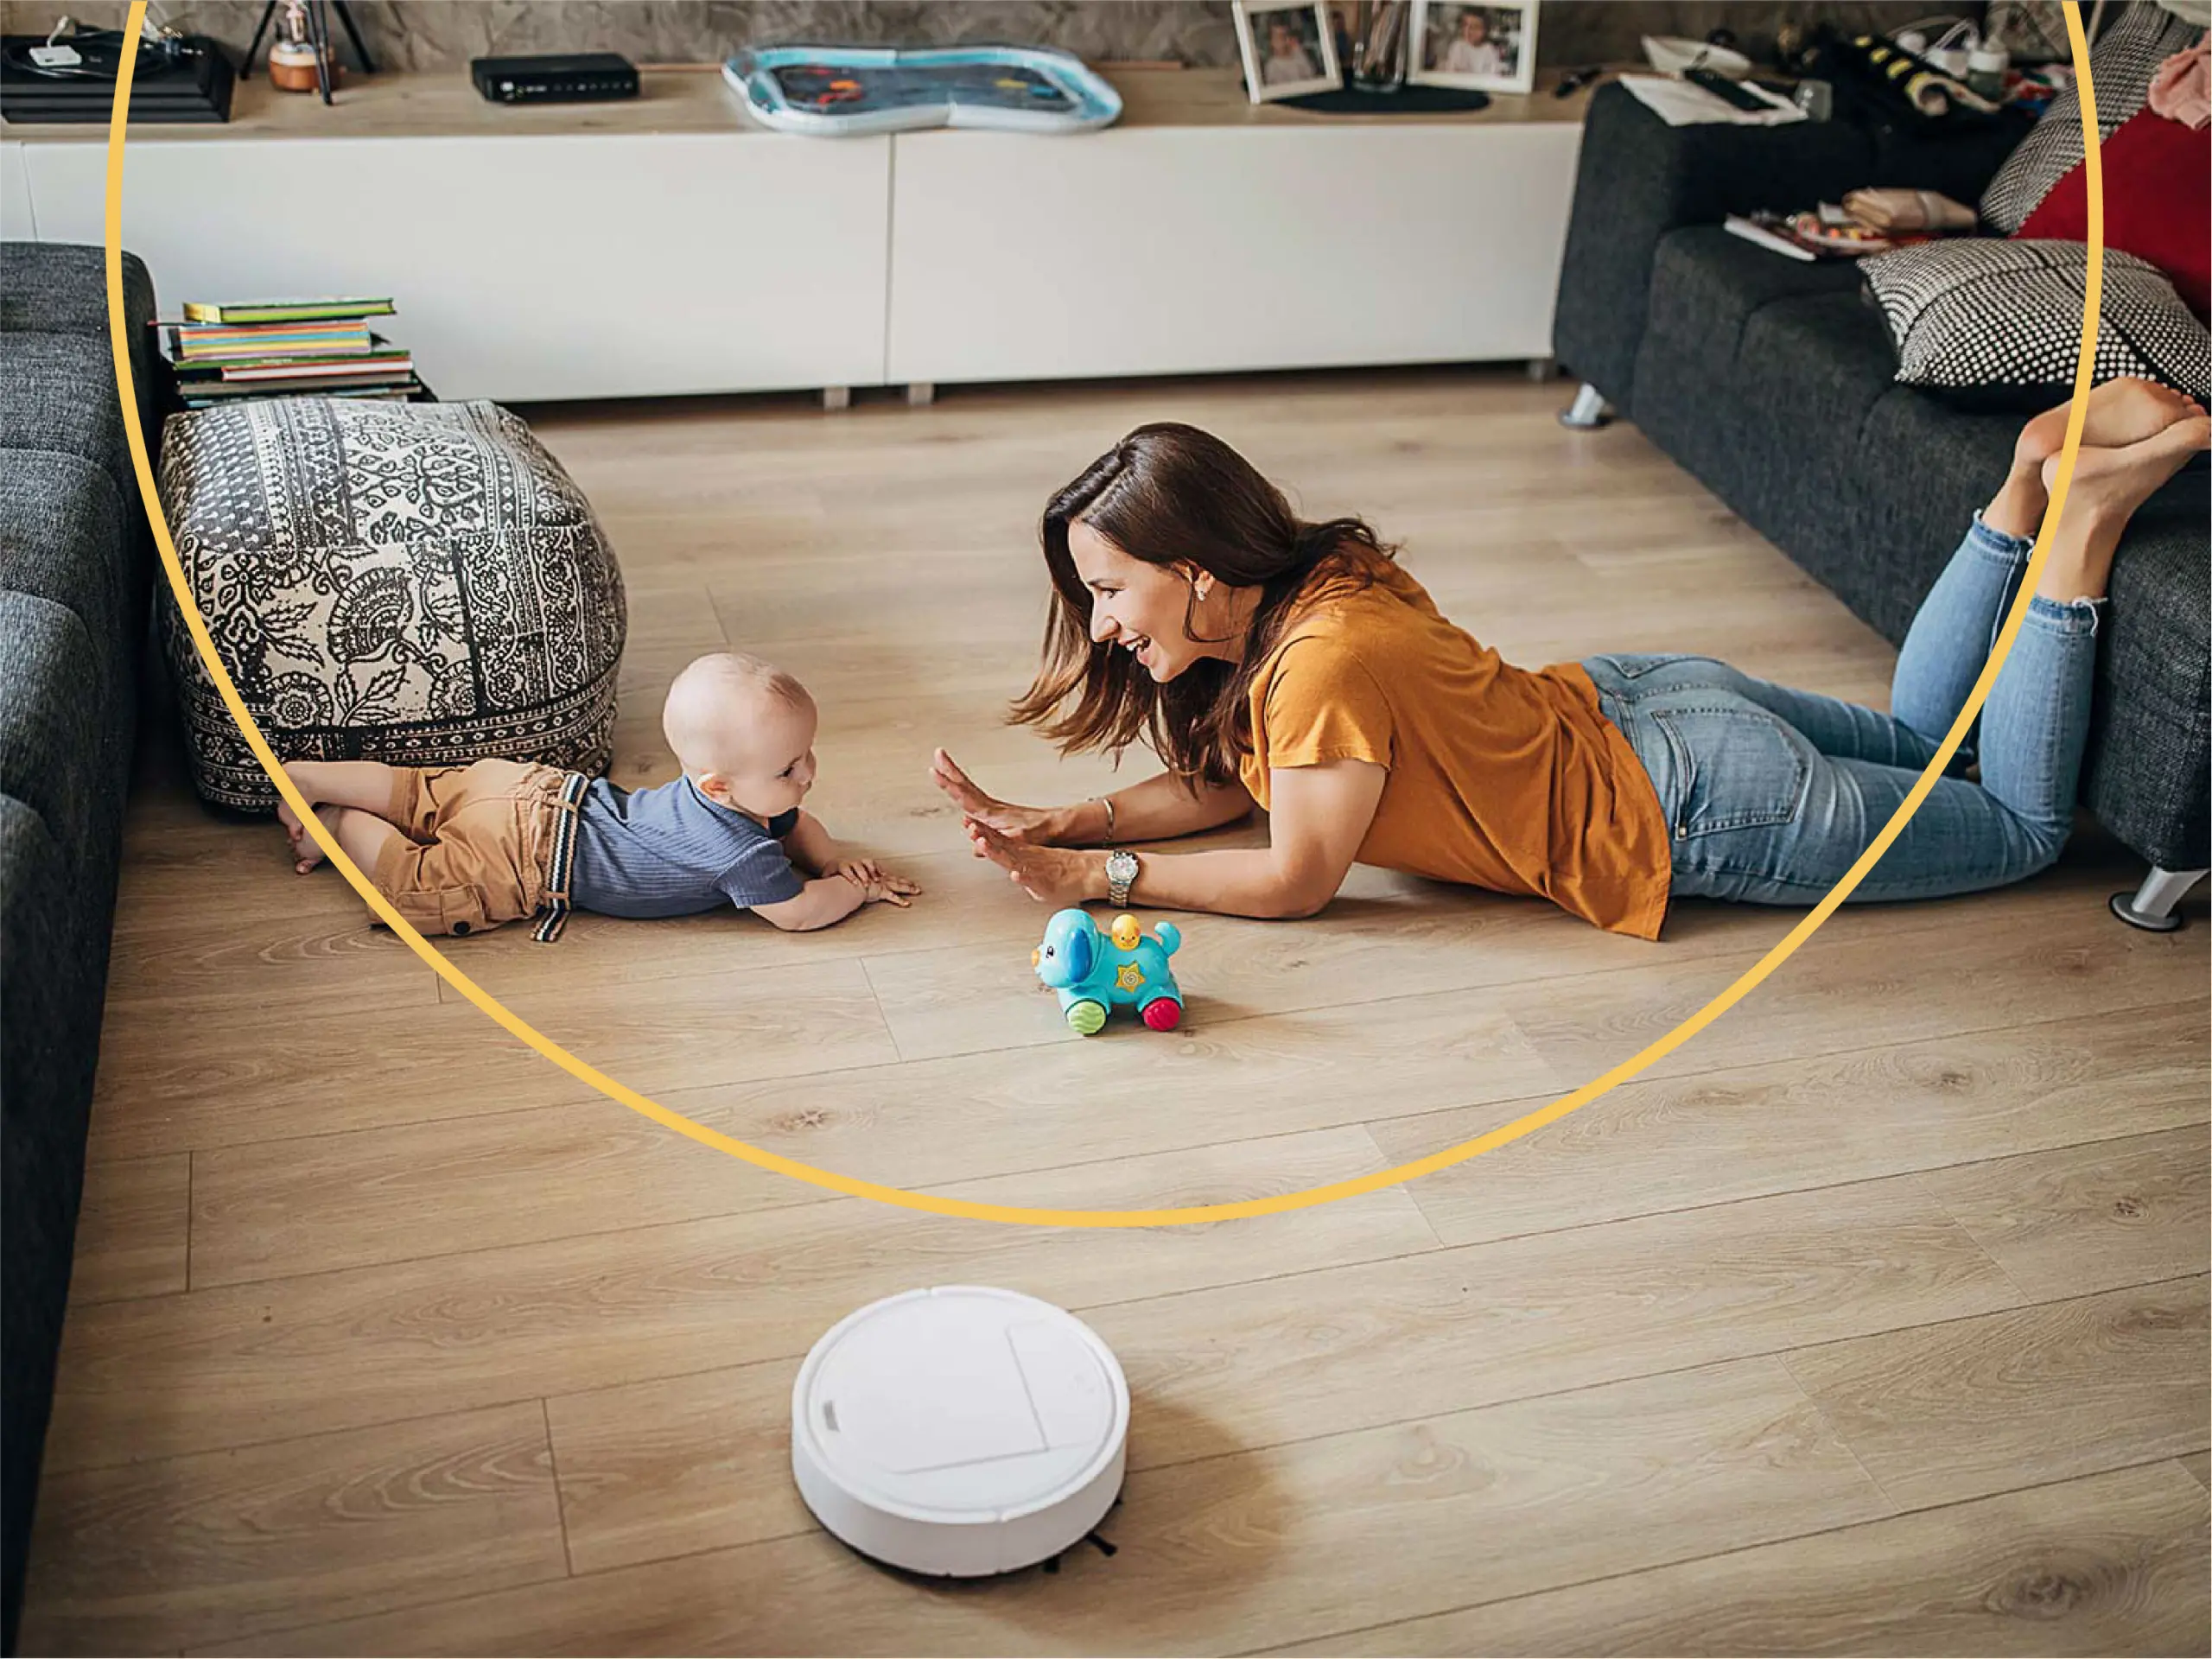 Mother and child play together on hardwood floors in the living room while a smart vacuum cleans the floors